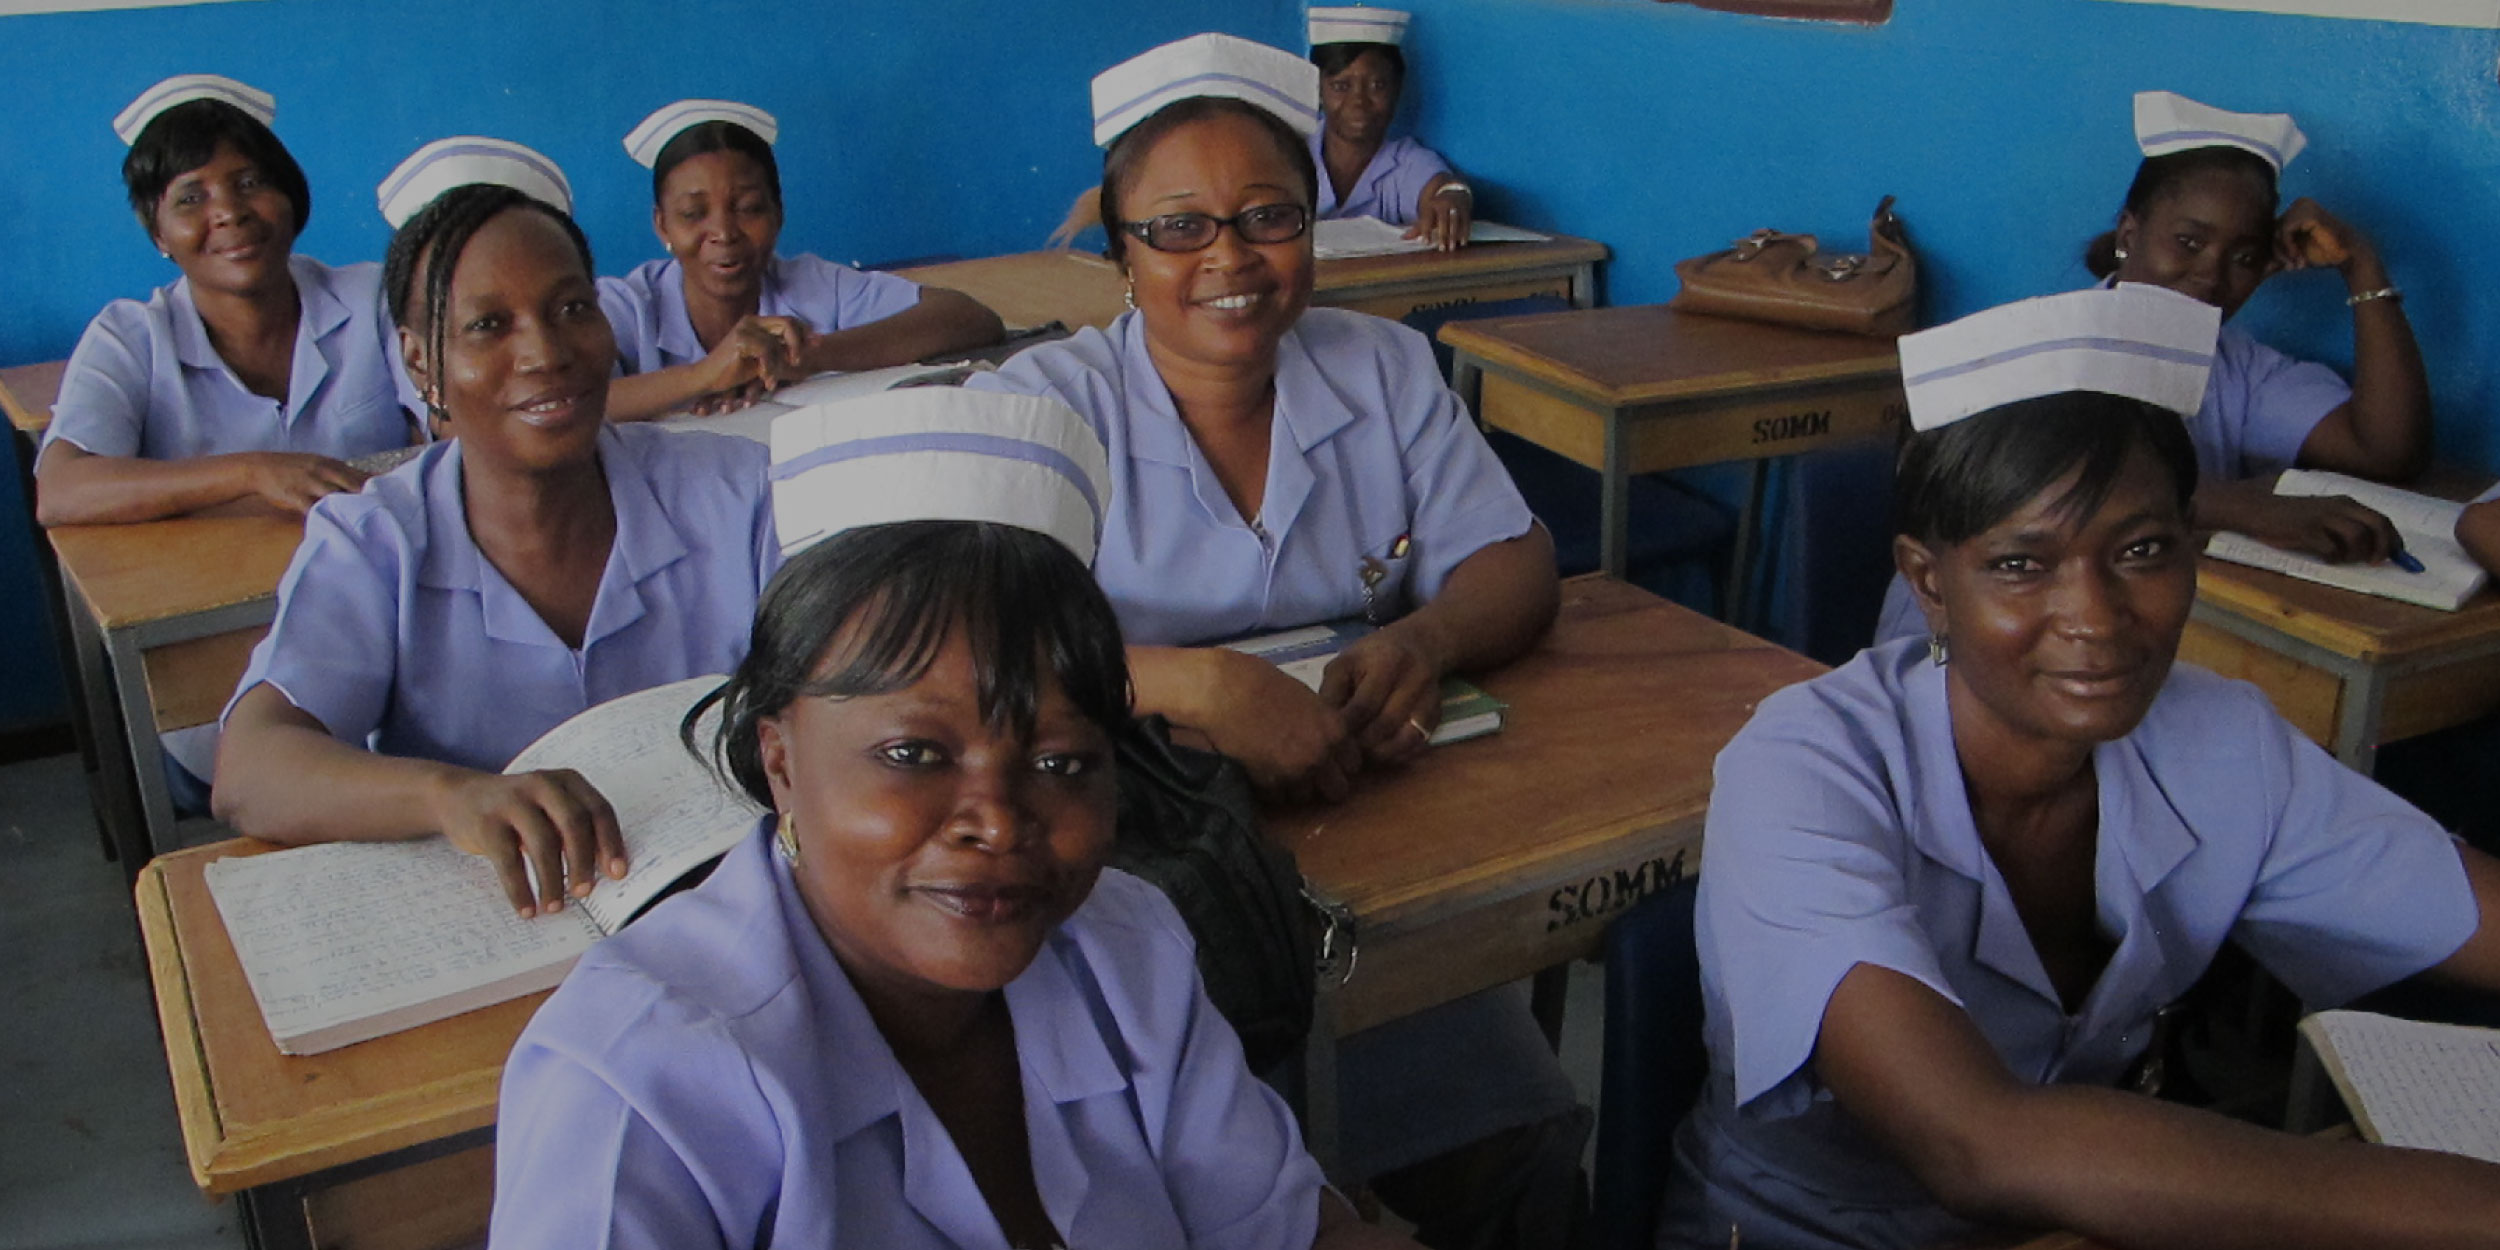 A group of seated African female nurses in uniform, smiling at the camera